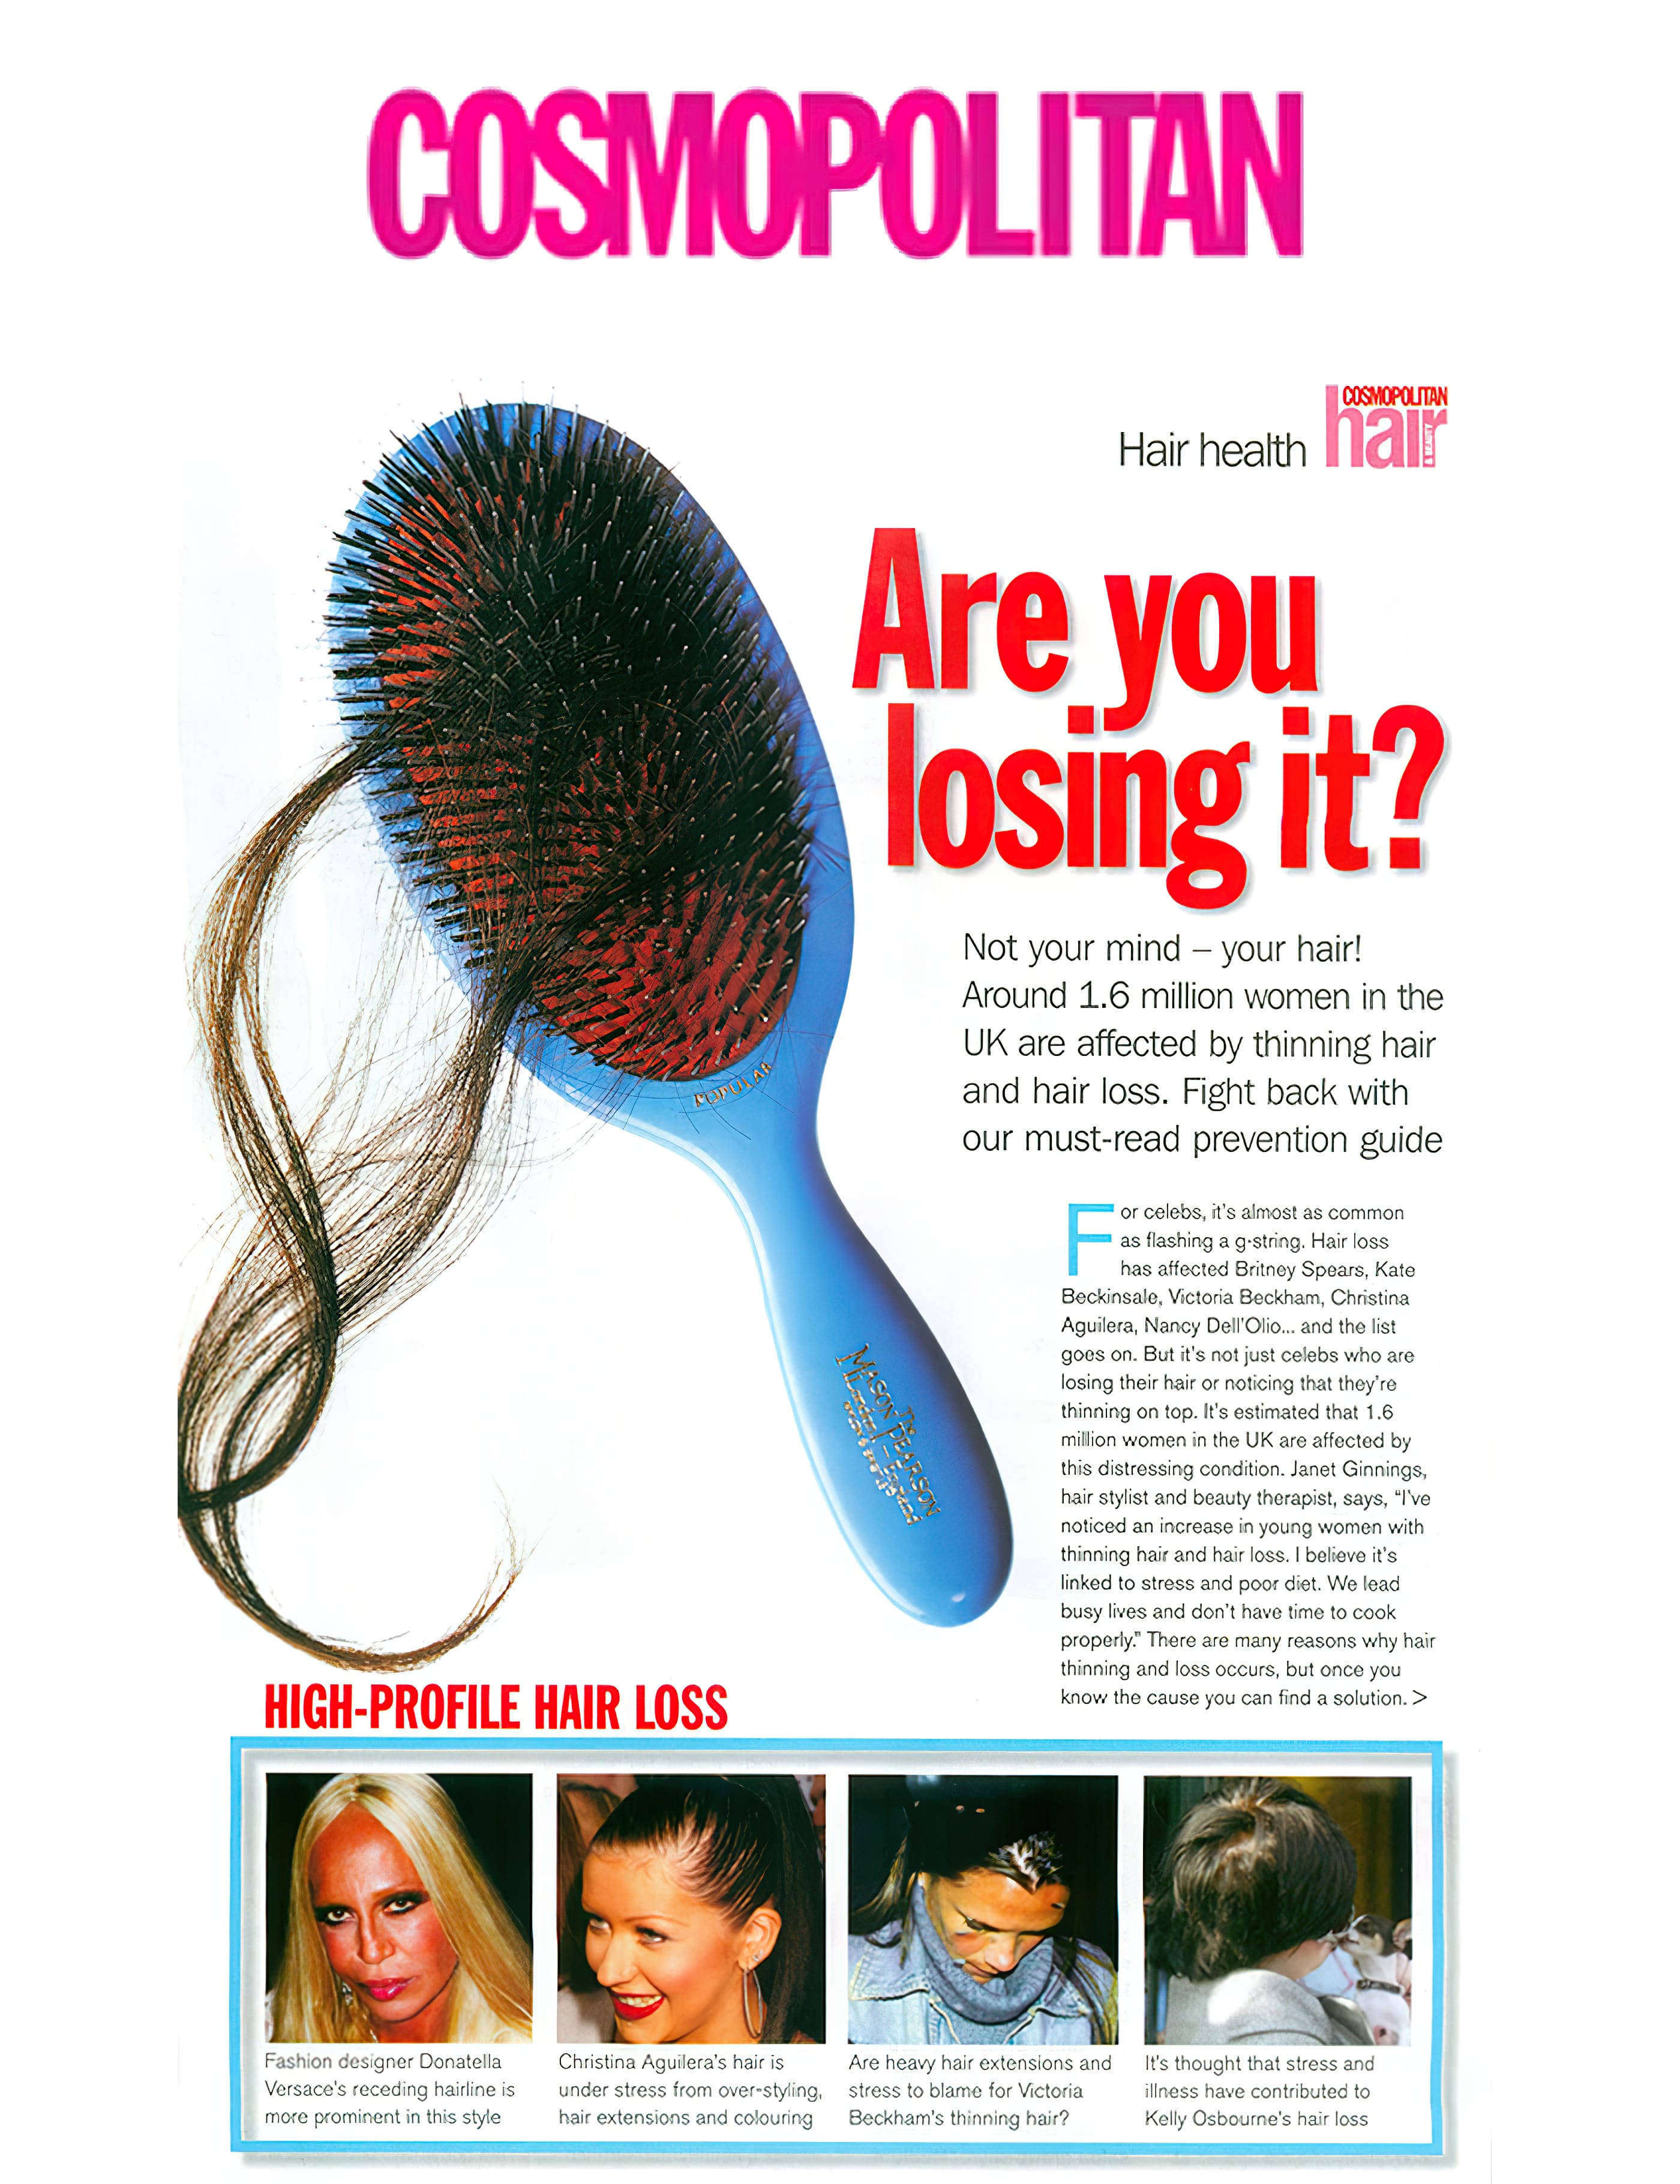 'Are you losing it?' - women's thinning hair and hair extension hair loss in Cosmopolitan